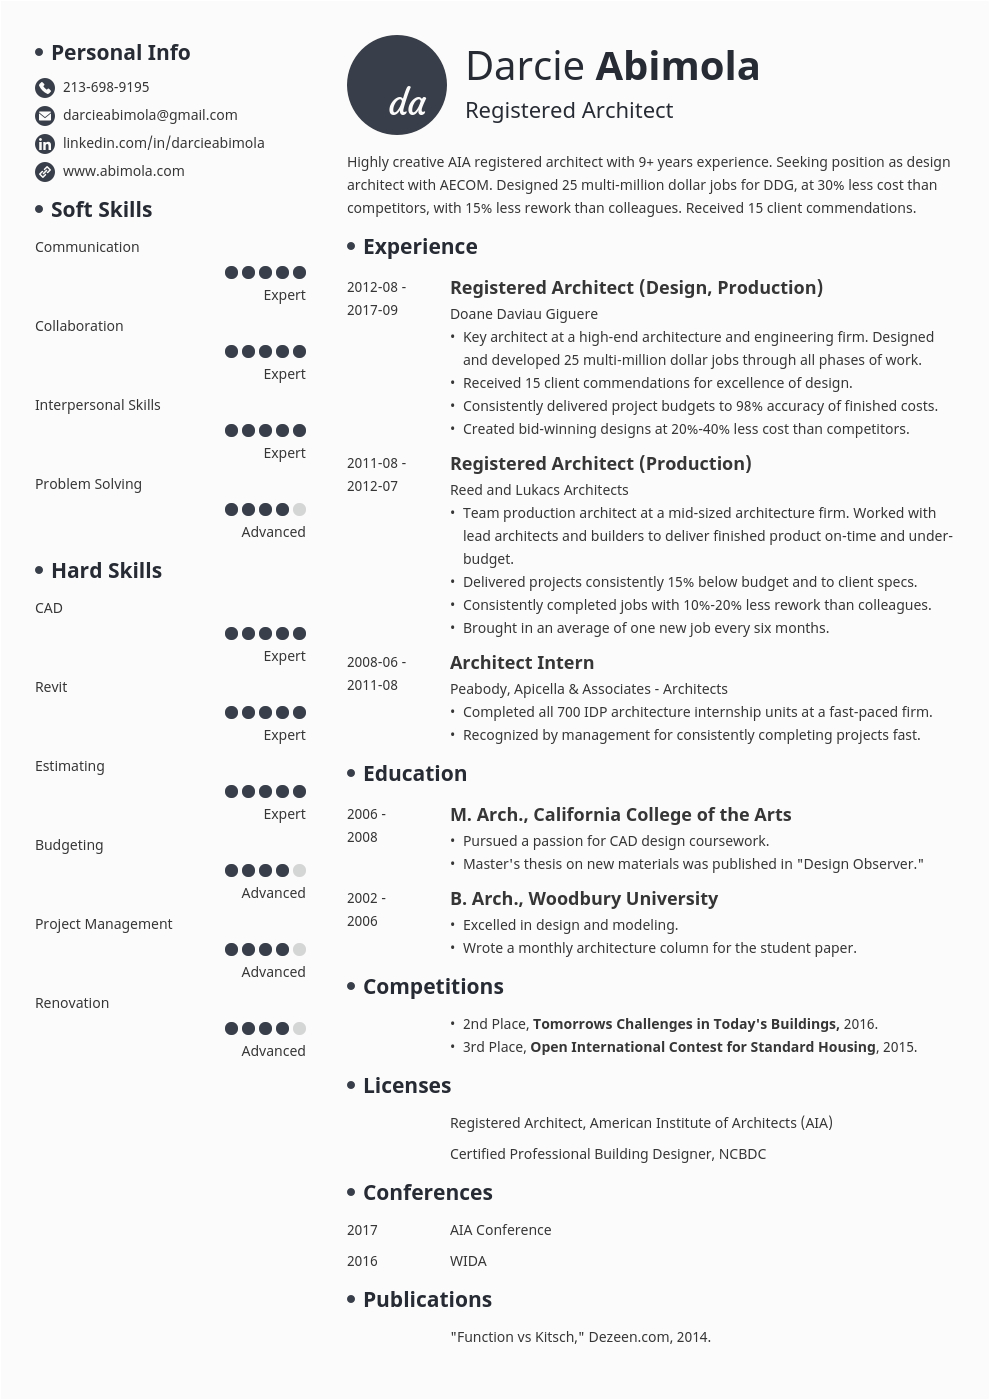 Make Your Pitch In Resume Sample Short and Engaging Pitch for Resume 10 05 2019 · Resume Pitch About